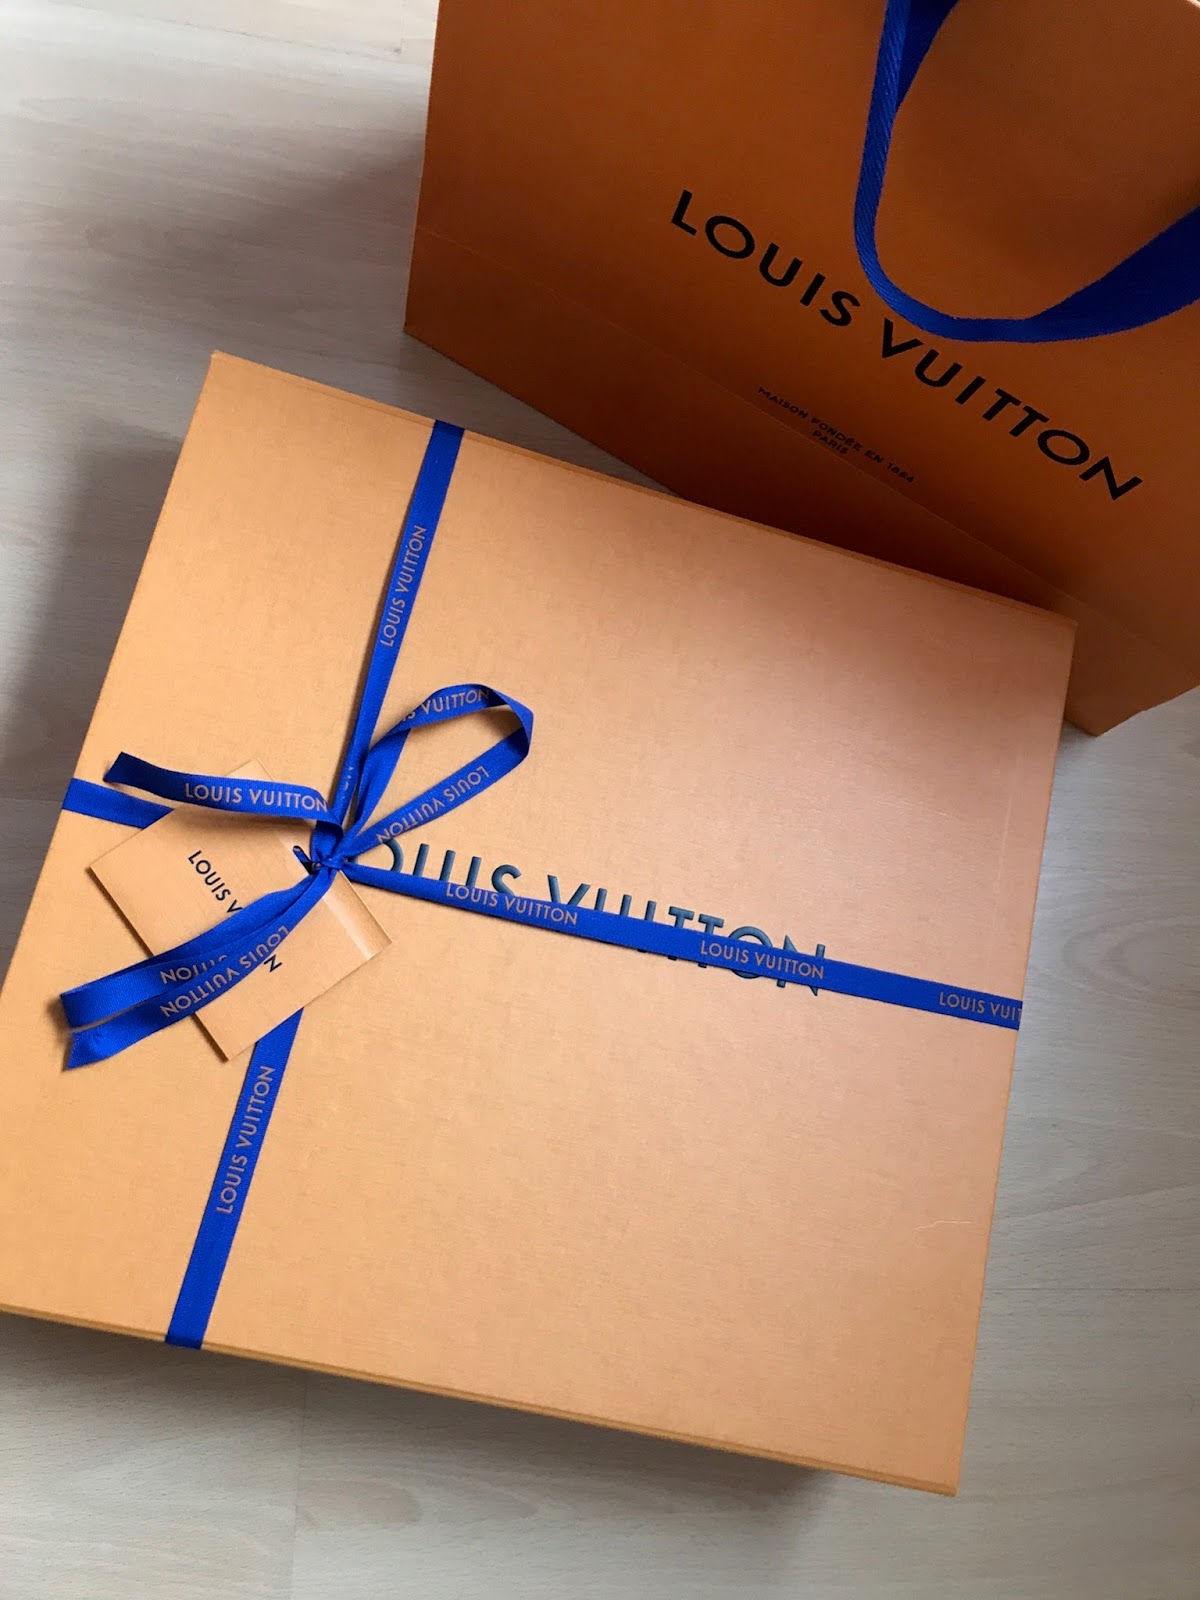 LOUIS VUITTON LIMITED EDITION UNBOXING 2020